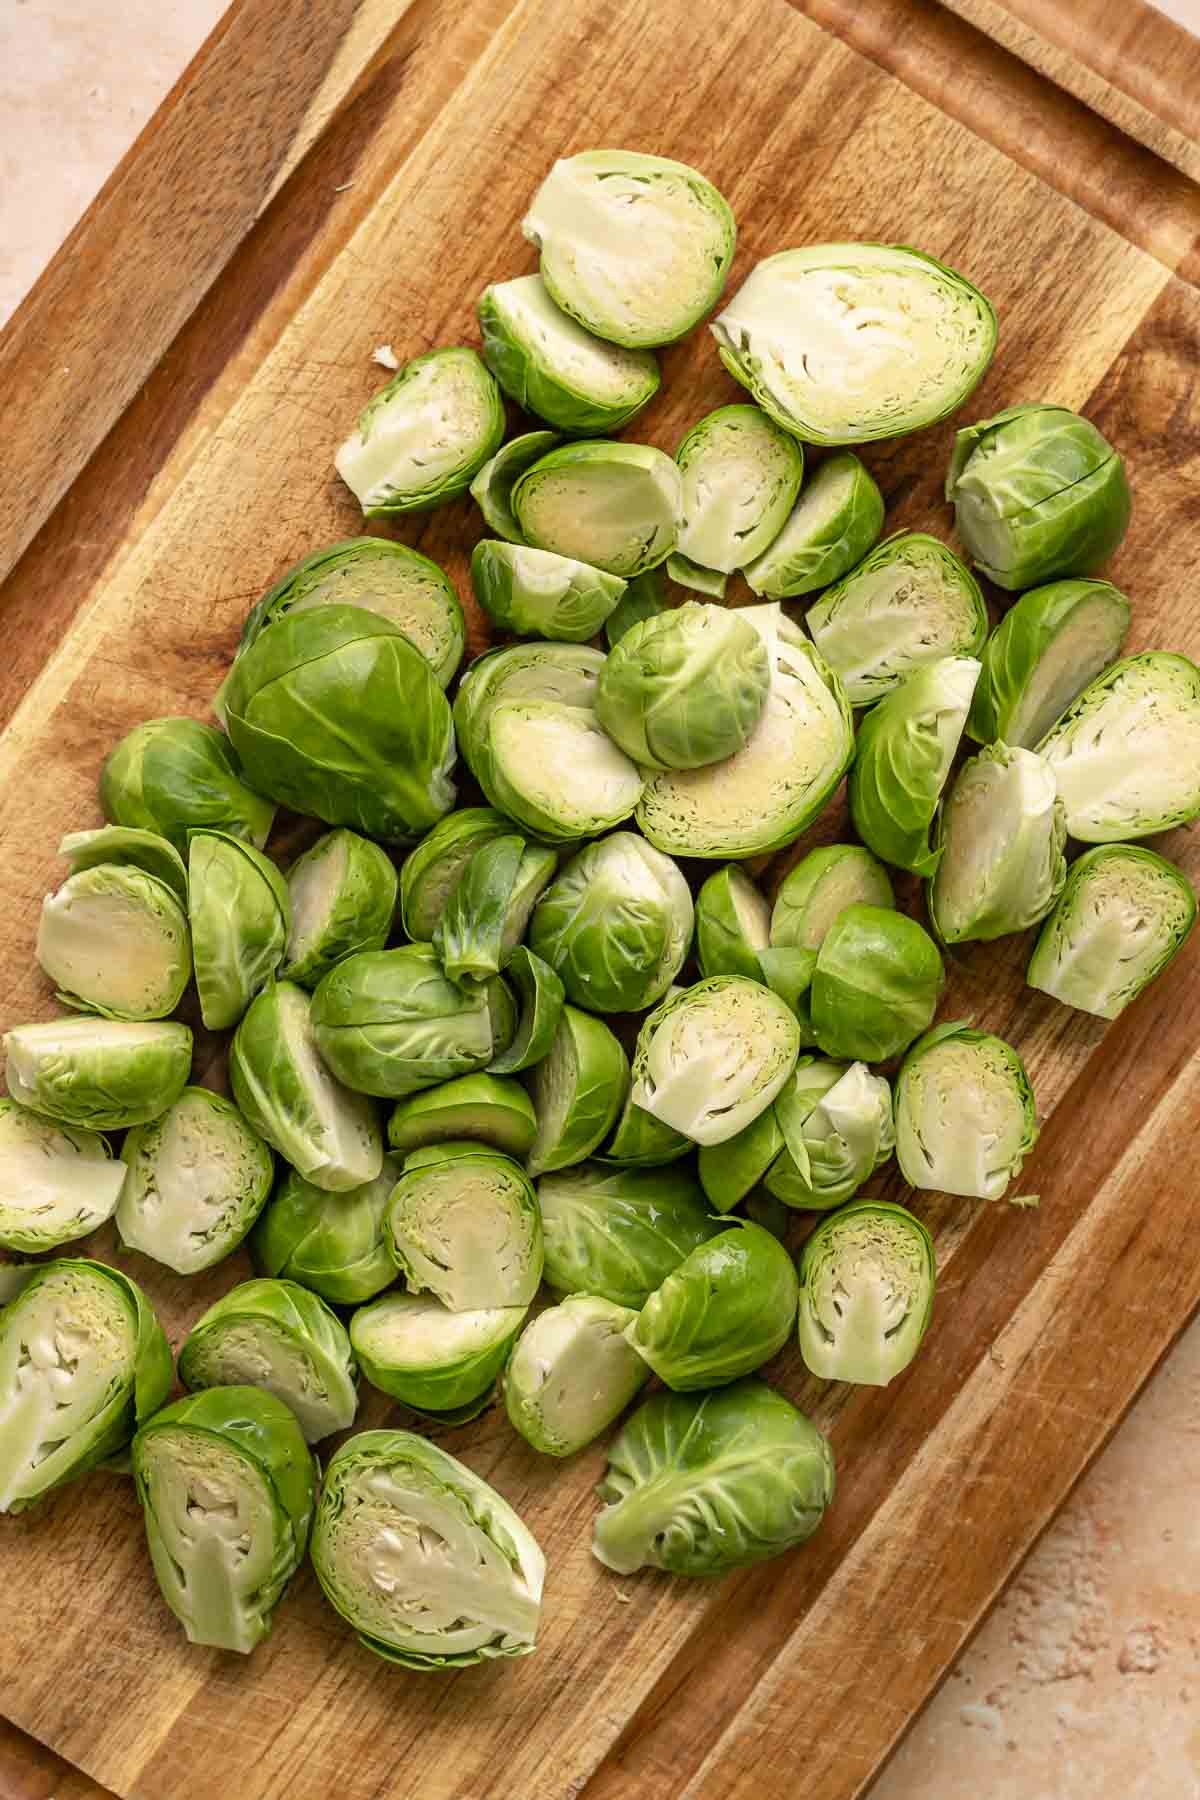 Cut brussels sprouts on a cutting board.